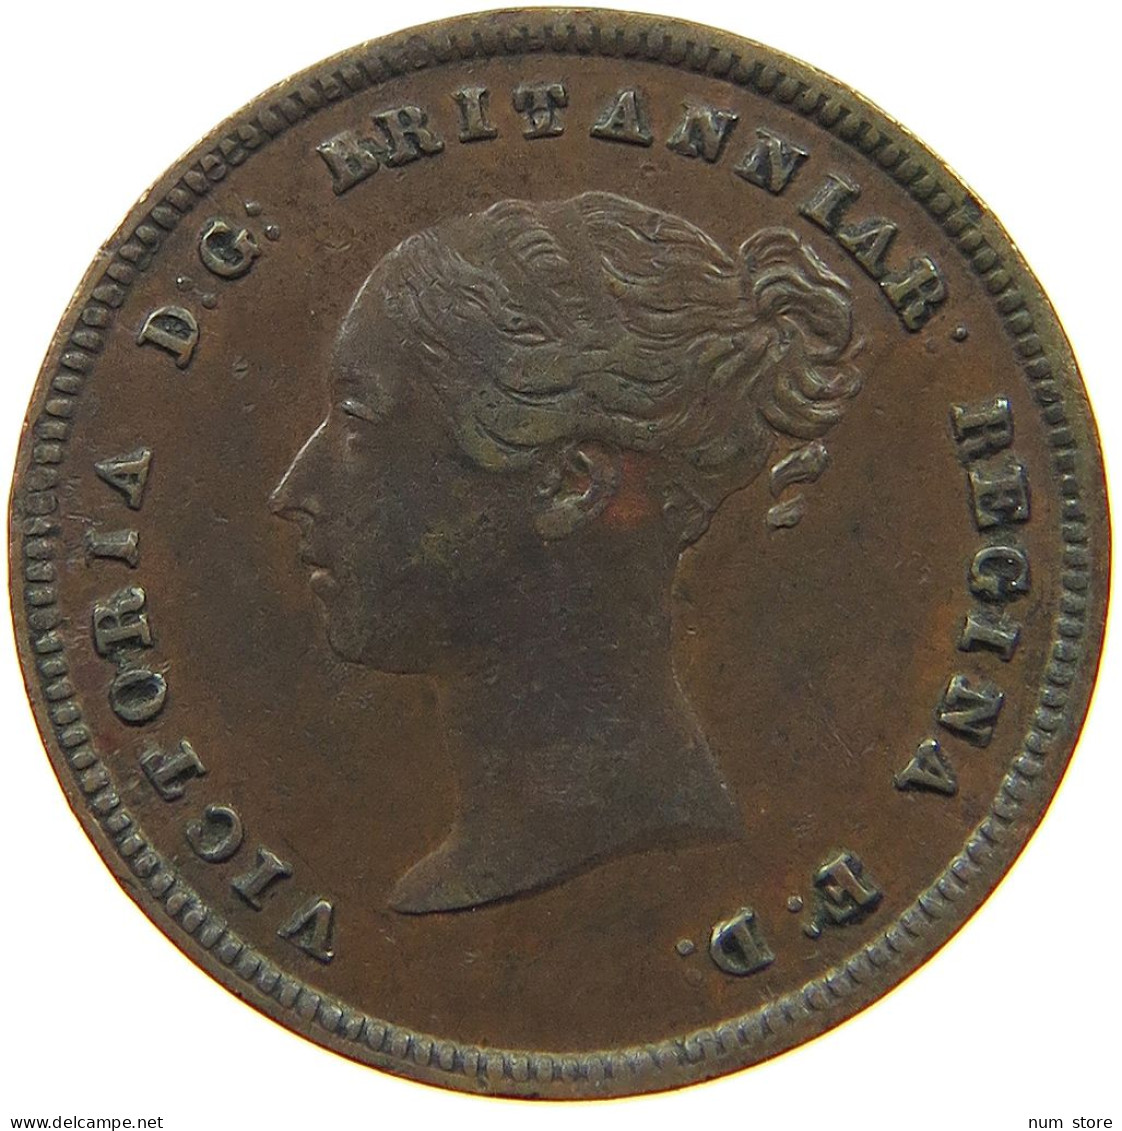 GREAT BRITAIN HALF FARTHING 1844 Victoria 1837-1901 #t073 0229 - A. 1/4 - 1/3 - 1/2 Farthing